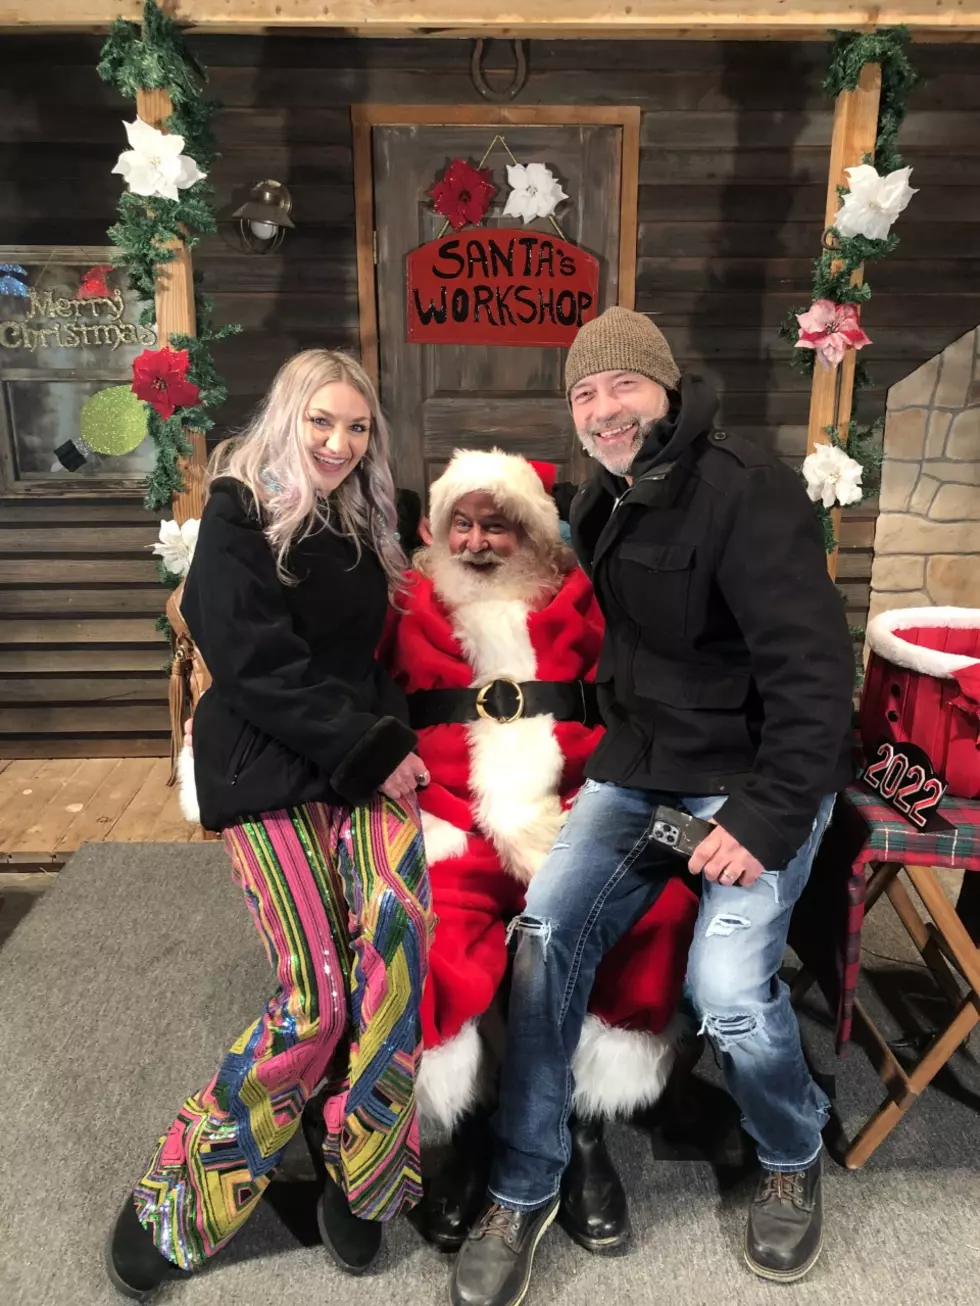 Santa Came to TOWNsquare Media Billings [Photos and Interview]